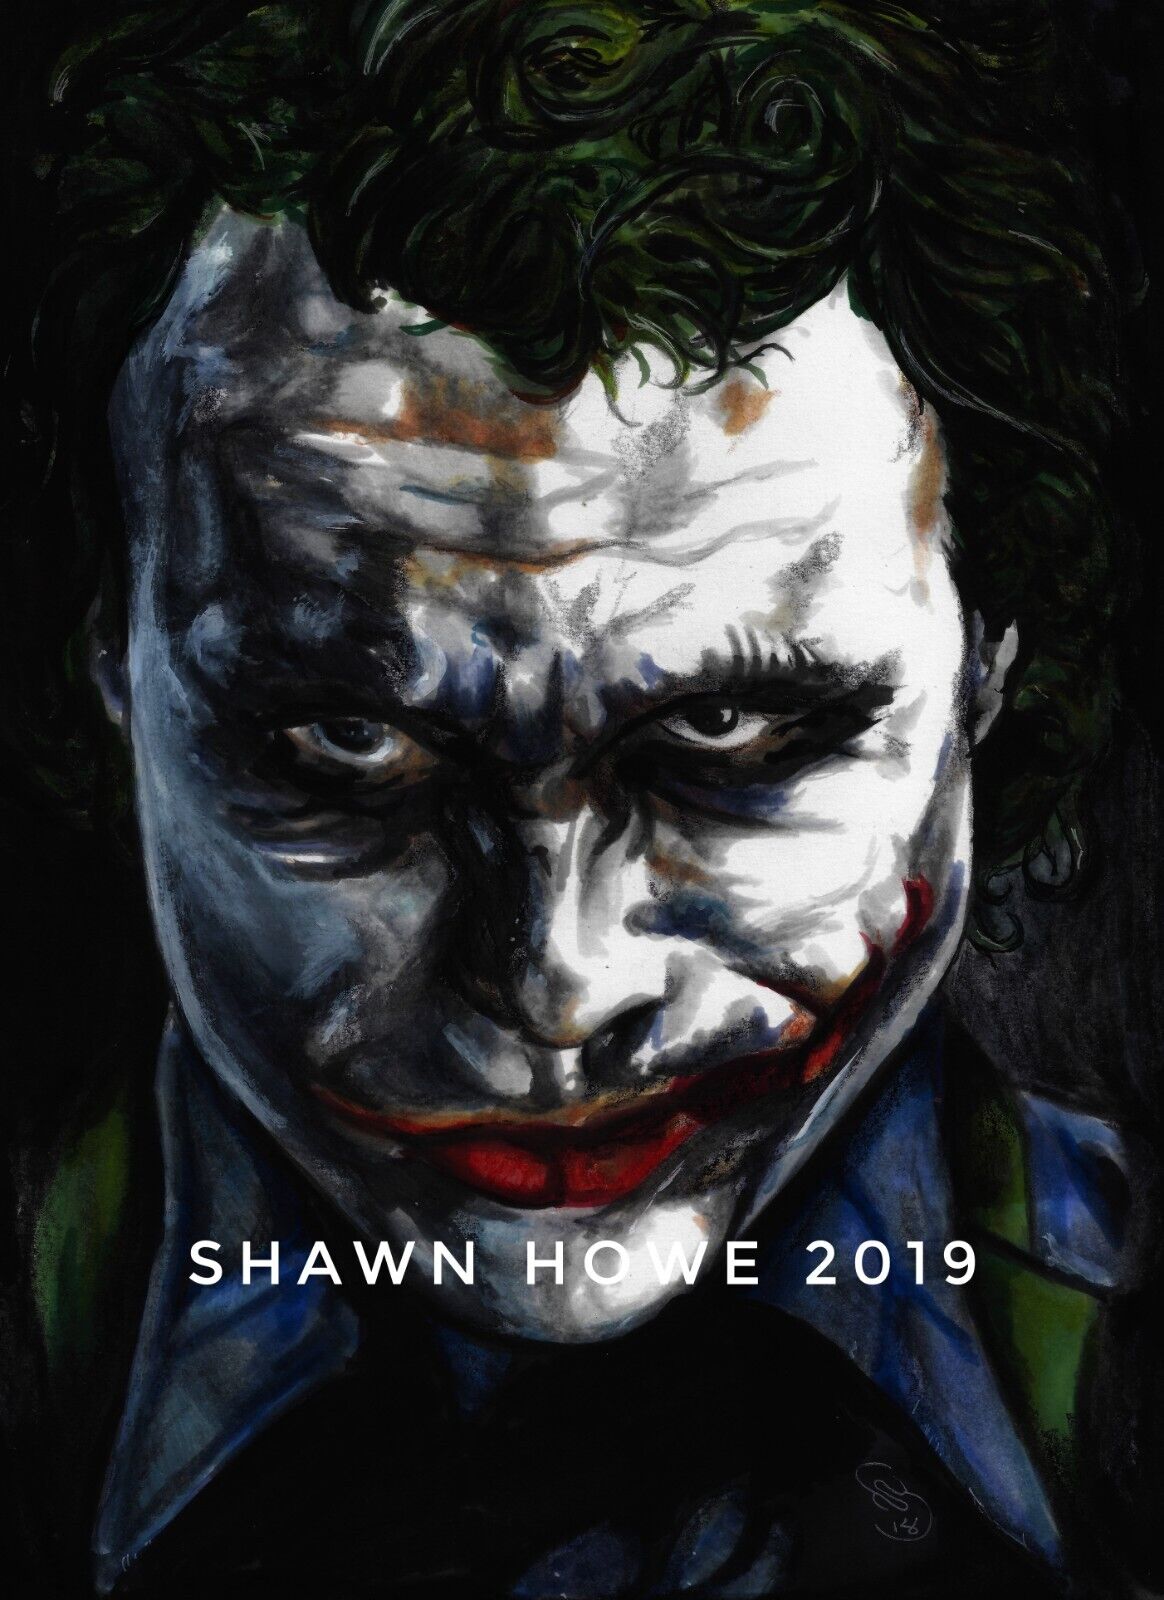 Shawn Howe Why so Serious? Art  print 11x17 signed by artist 3 Pack Joker